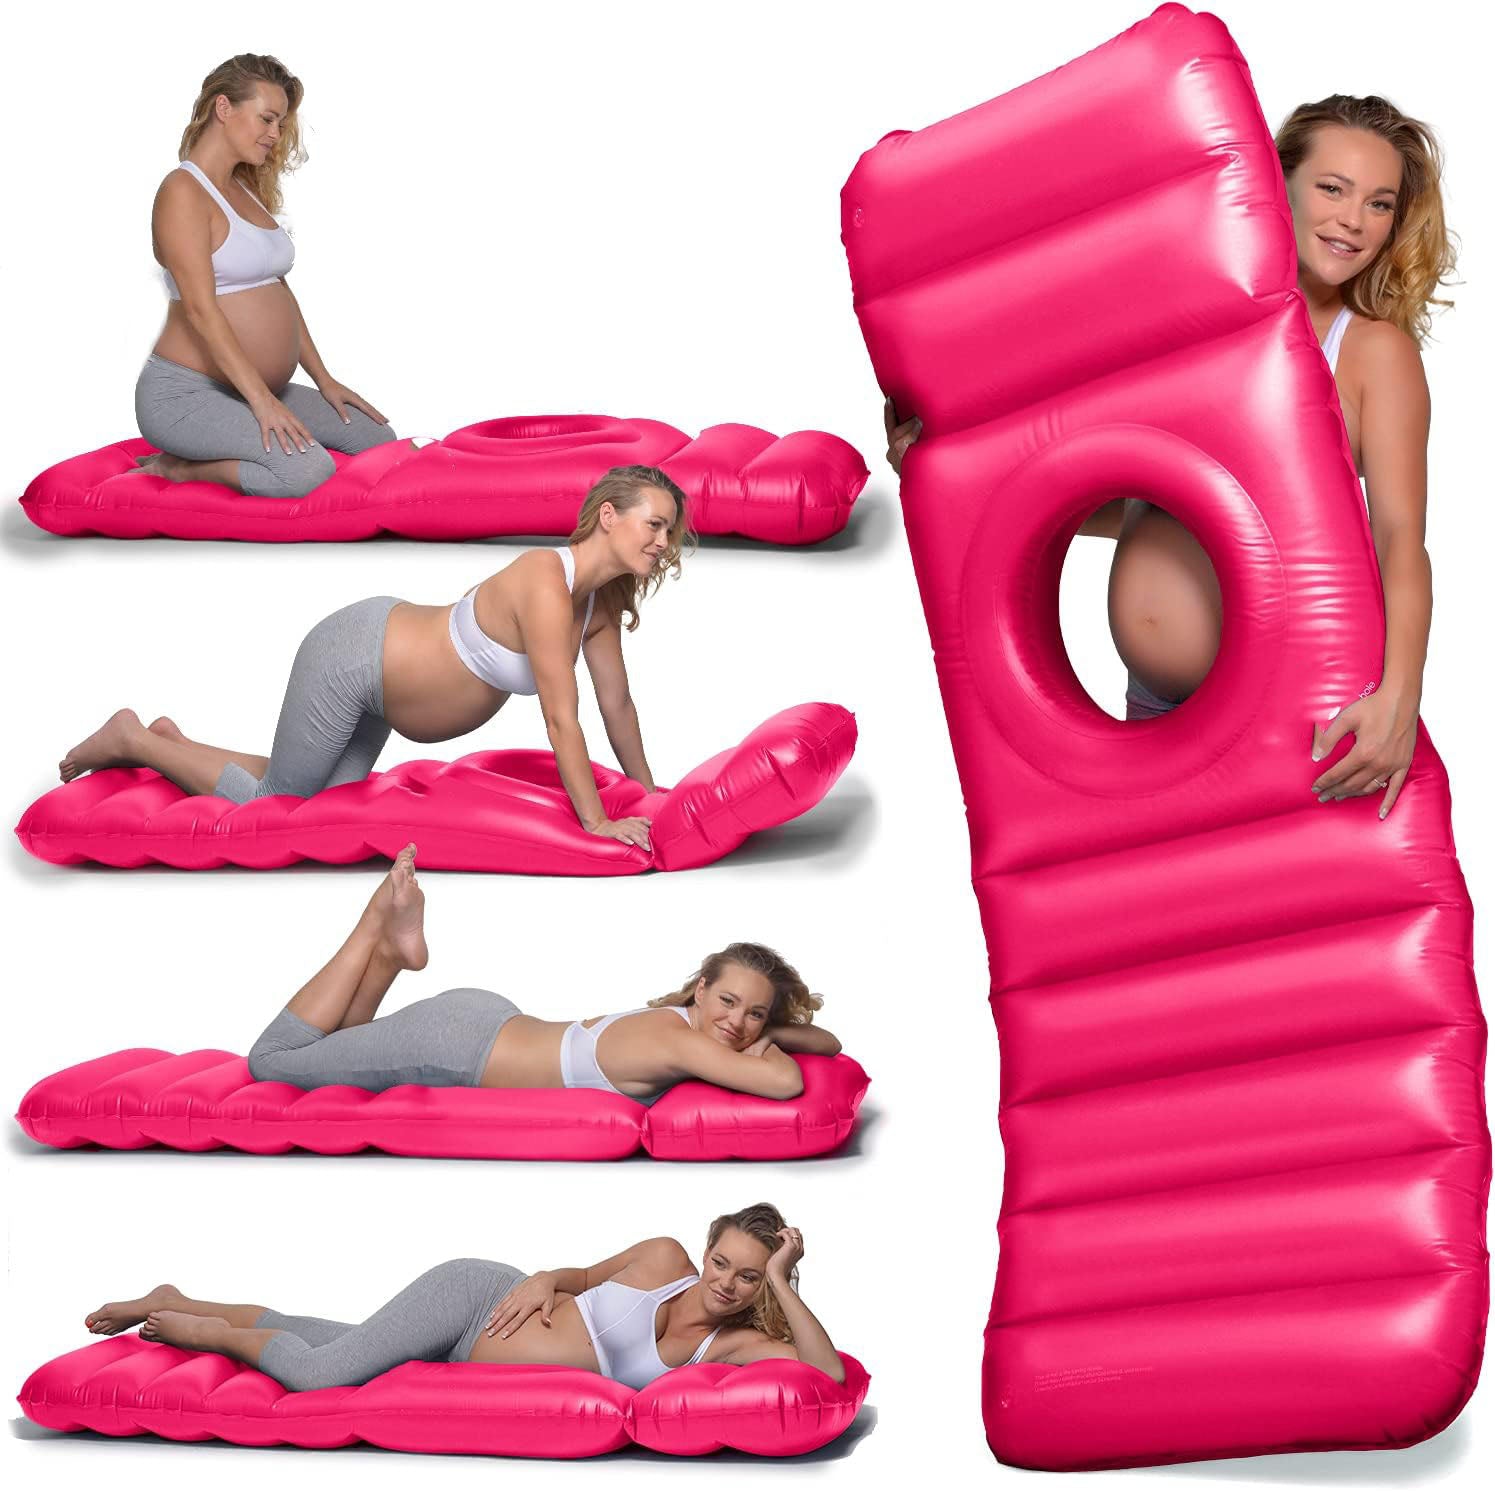 The Original Inflatable Pregnancy Pillow - Pink - Buy The Original Inflatable Pregnancy Pillow - Pink in Dubai - HOCC Dubai - Baby playground outdoor - Shop baby product - Shop Pet product - shop home decor and lighting in Dubai - HOCC Dubai - Baby playgr